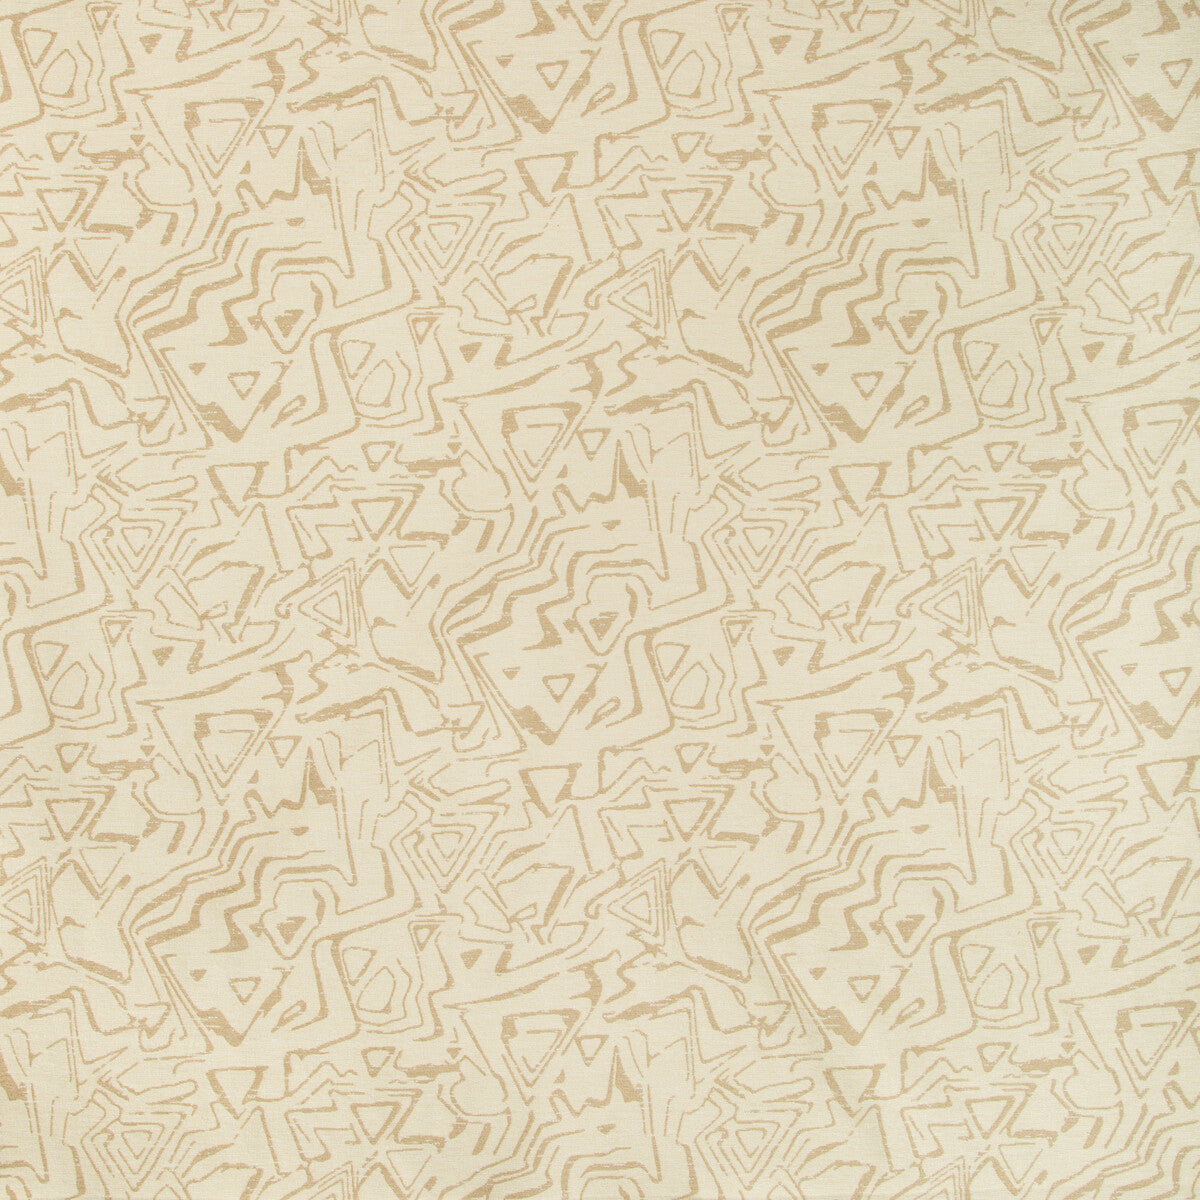 Kravet Design fabric in 34955-116 color - pattern 34955.116.0 - by Kravet Design in the Performance Crypton Home collection